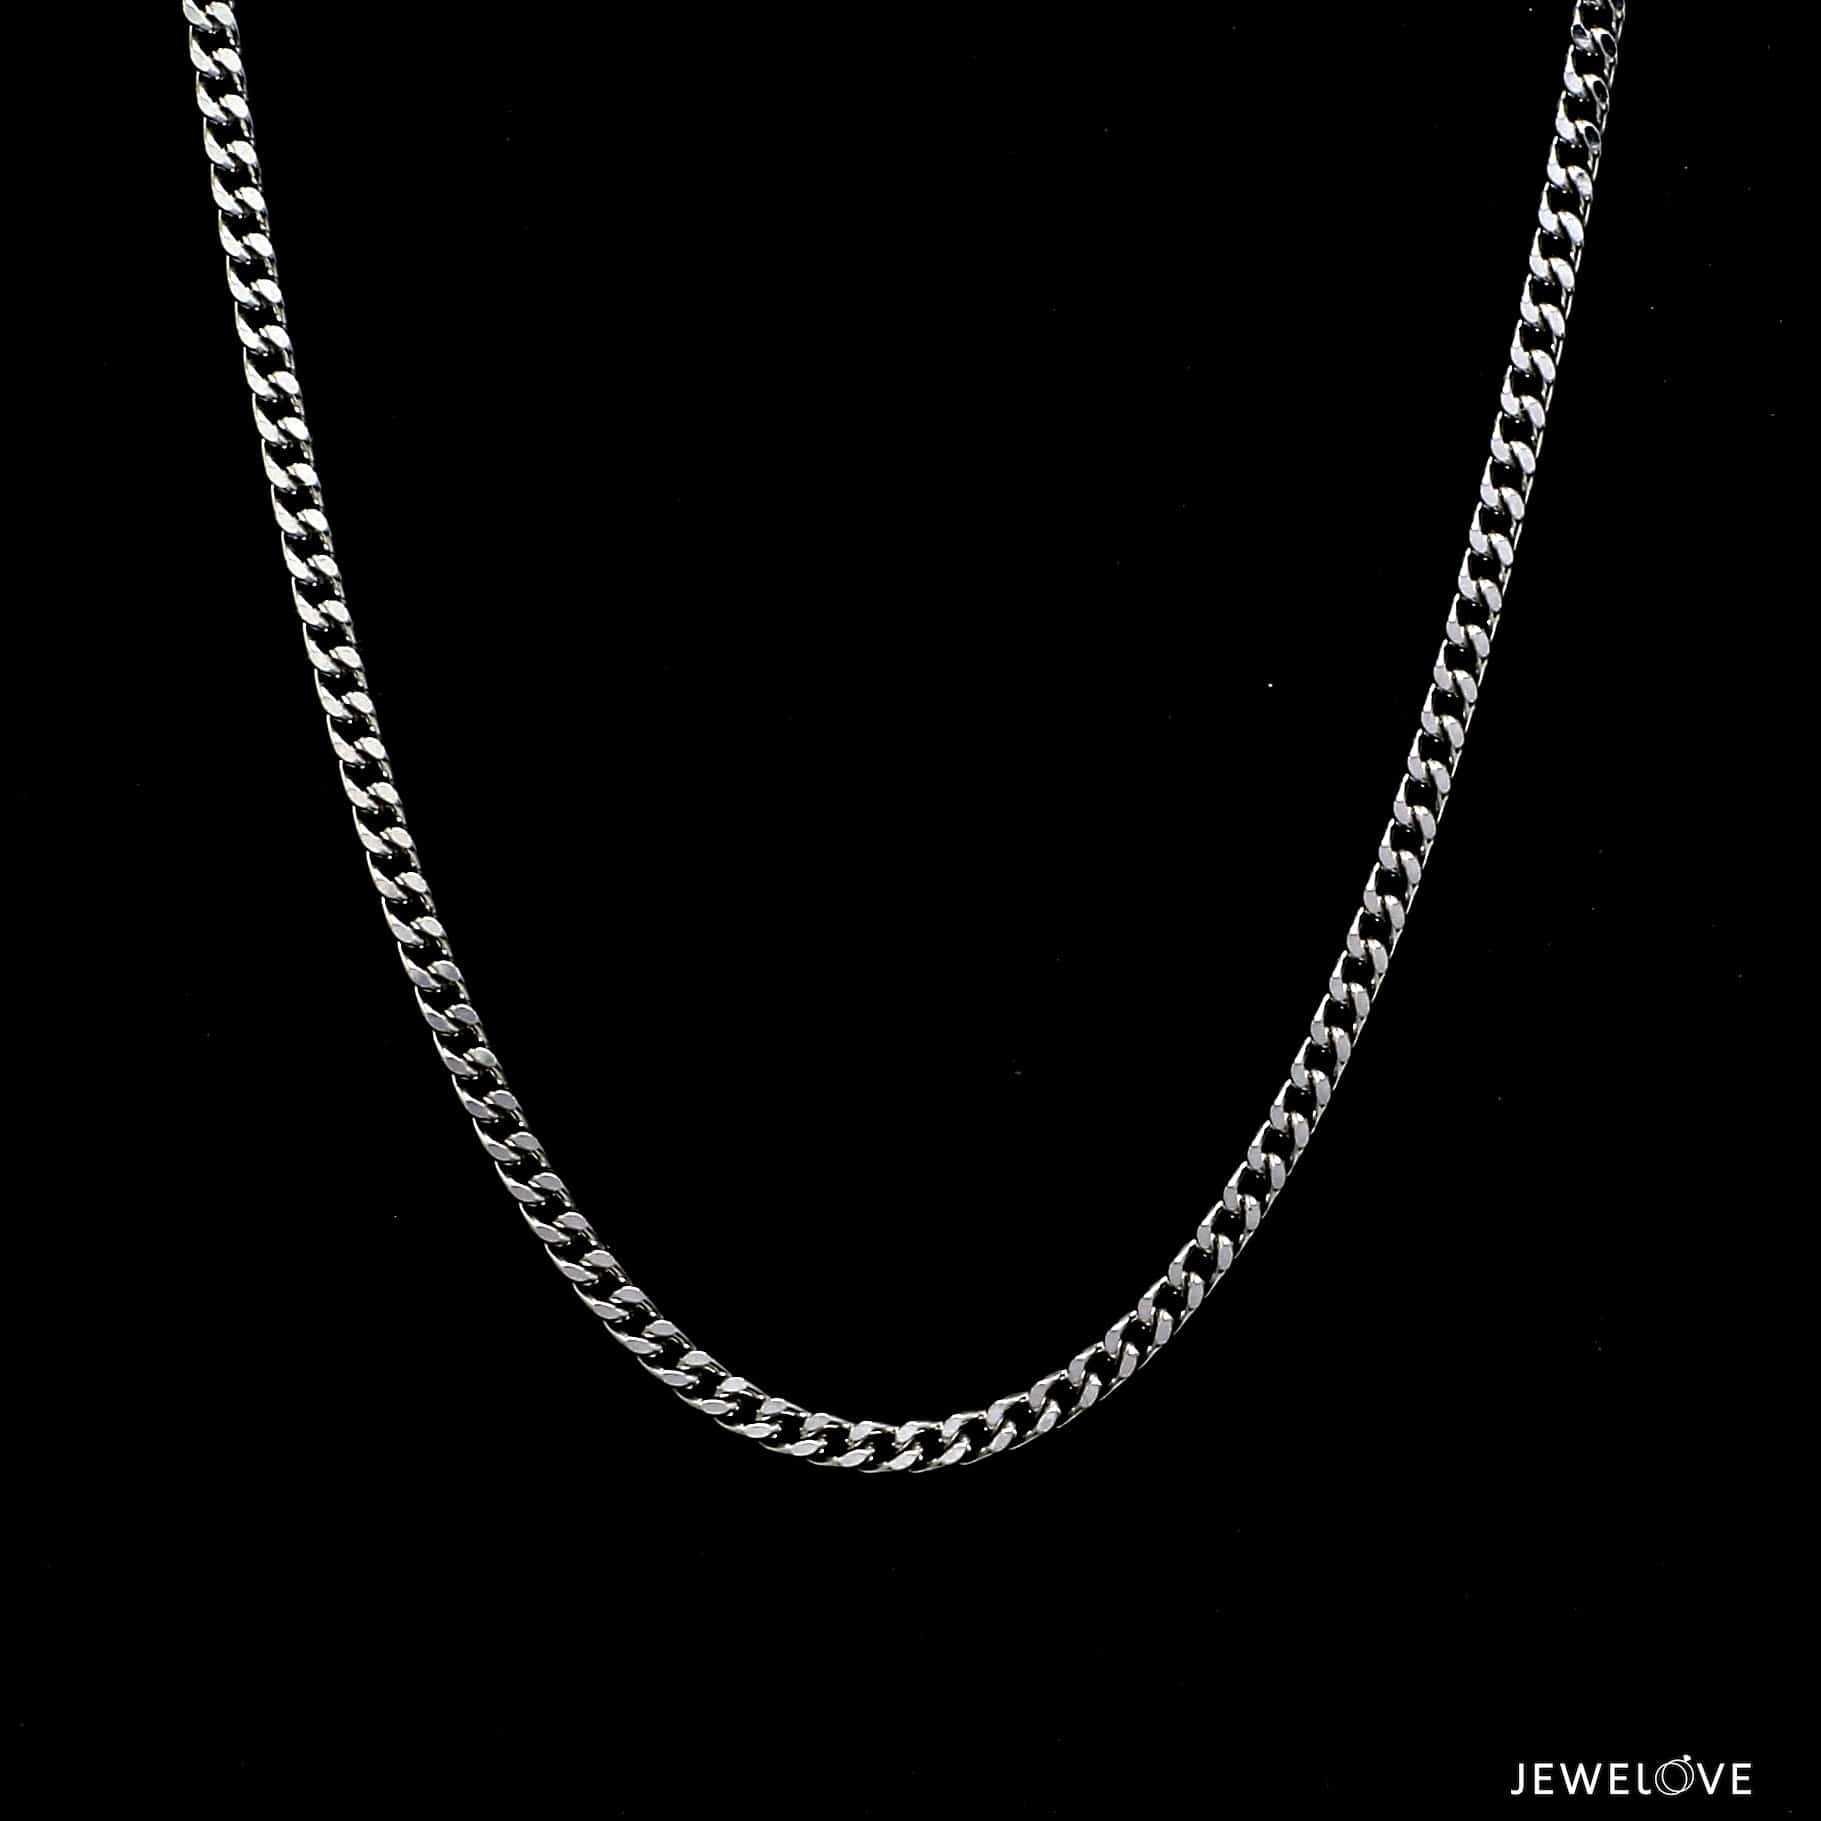 David Yurman Box Chain Necklace in Sterling Silver, 5.2mm - 26 Inches |  REEDS Jewelers